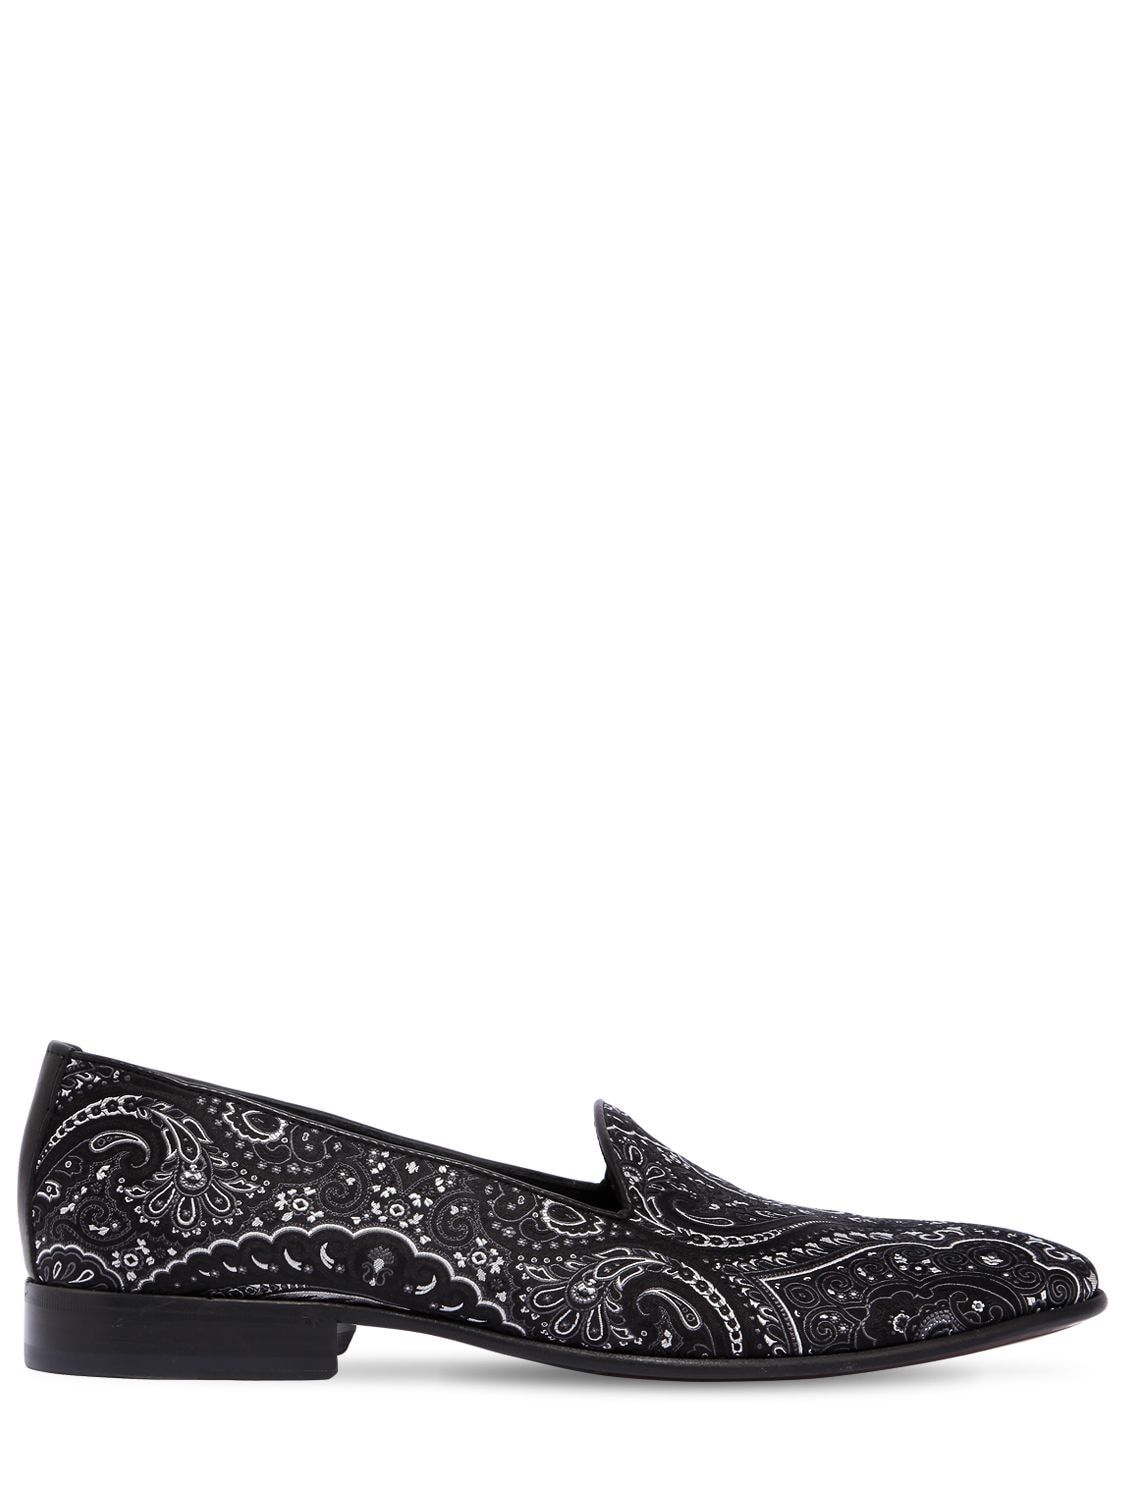 Etro Paisley Silk Jacquard Loafers In Black